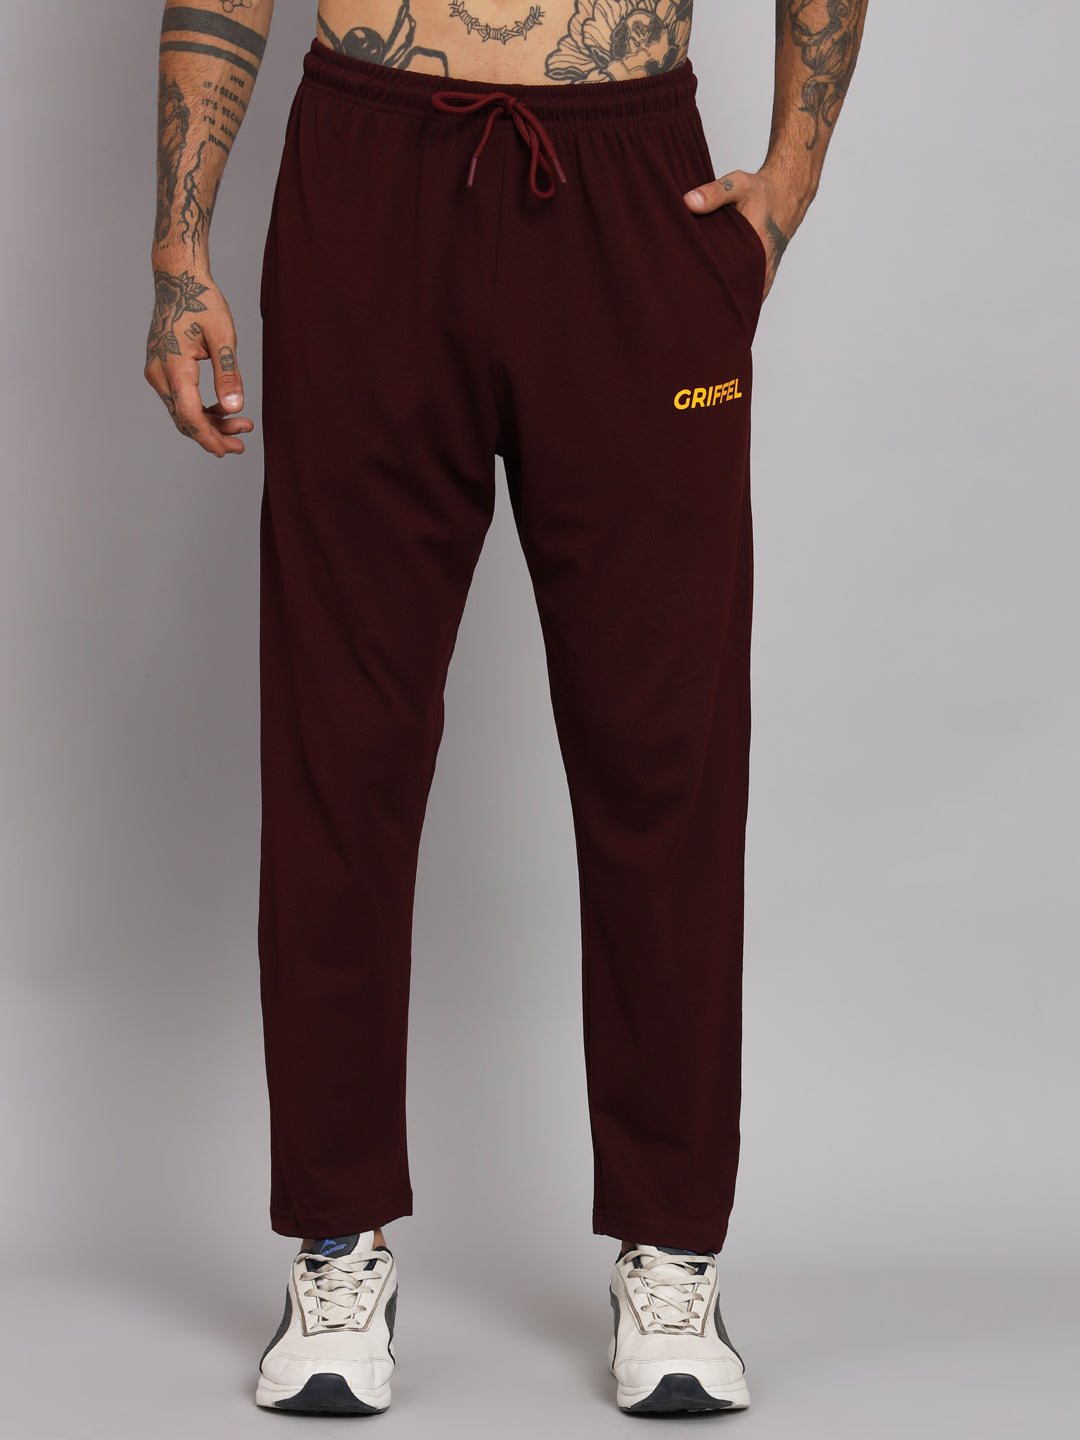 Griffel Men's Pre Winter Front Logo Solid Cotton Basic Hoodie and Joggers Full set Maroon Tracksuit